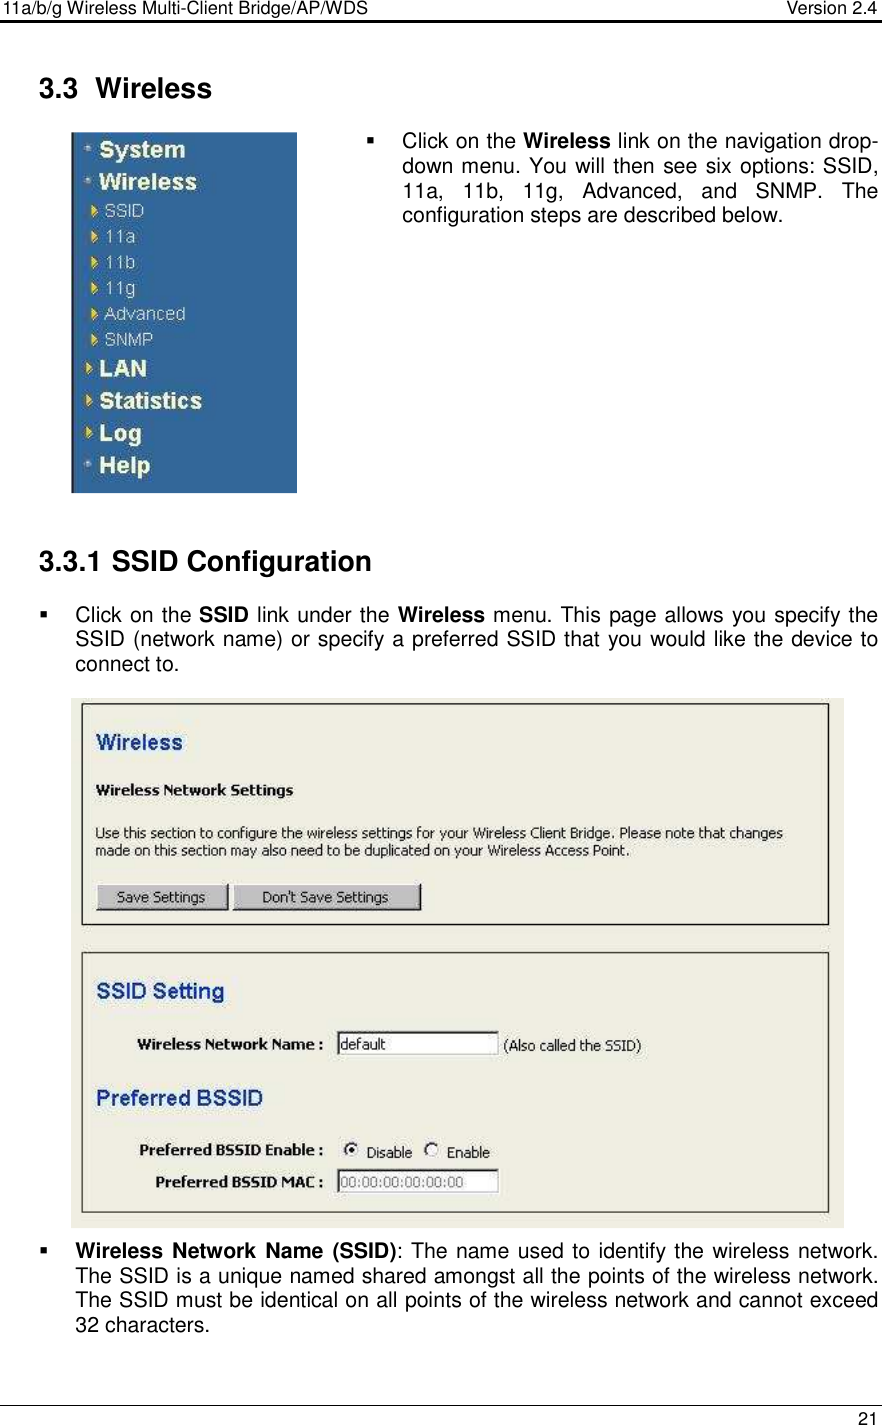 11a/b/g Wireless Multi-Client Bridge/AP/WDS                                  Version 2.4    21   3.3  Wireless   Click on the Wireless link on the navigation drop-down menu. You will then see six options: SSID, 11a,  11b,  11g,  Advanced,  and  SNMP.  The configuration steps are described below.                3.3.1 SSID Configuration    Click on the SSID link under the Wireless menu. This page allows you specify the SSID (network name) or specify a preferred SSID that you would like the device to connect to.                          Wireless  Network Name (SSID): The name used to identify the wireless network. The SSID is a unique named shared amongst all the points of the wireless network. The SSID must be identical on all points of the wireless network and cannot exceed 32 characters.   